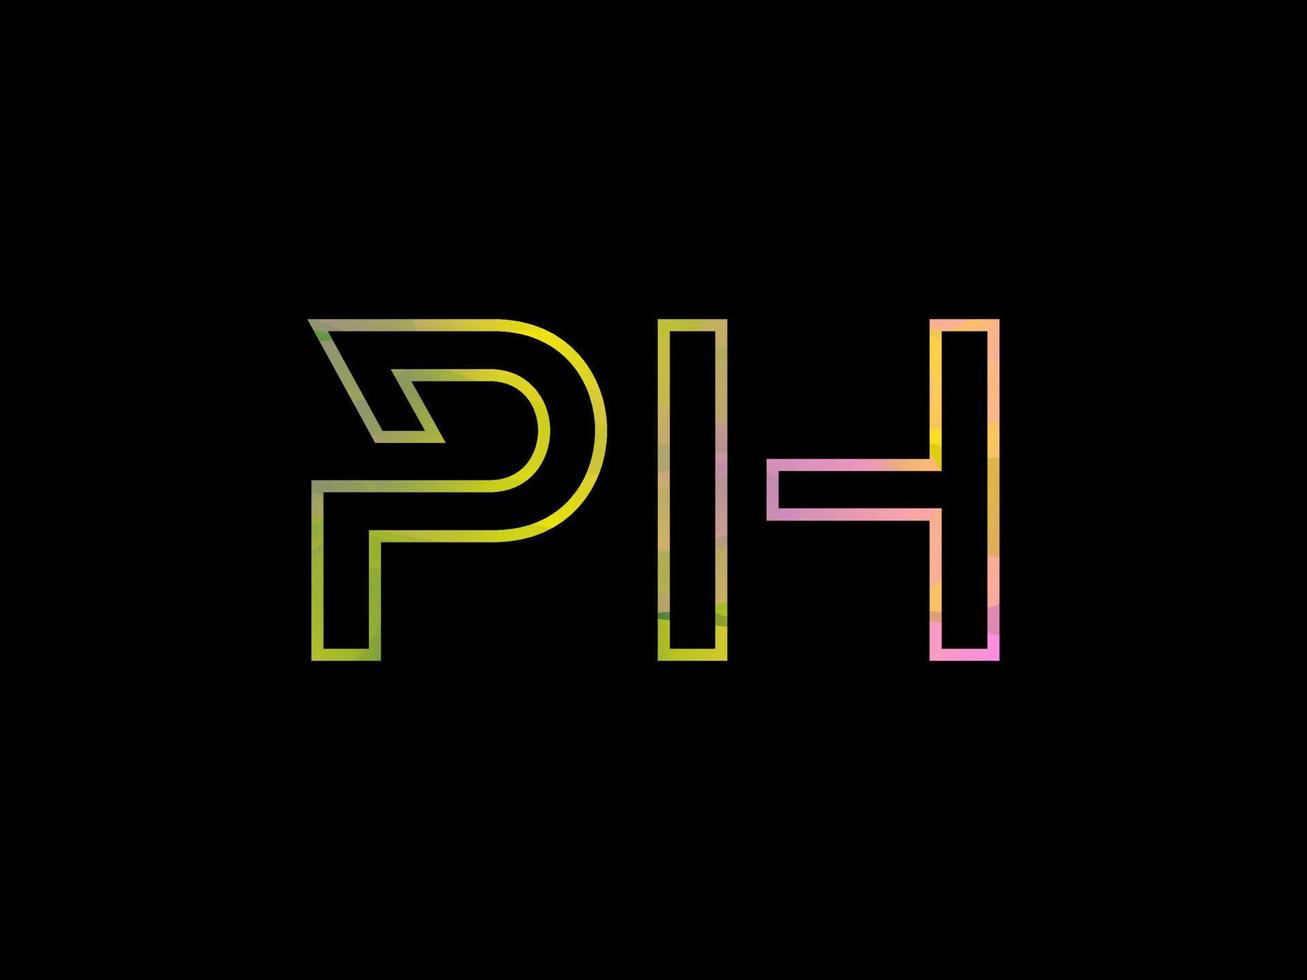 PH Letter Logo With Colorful Rainbow Texture Vector. Pro vector. vector